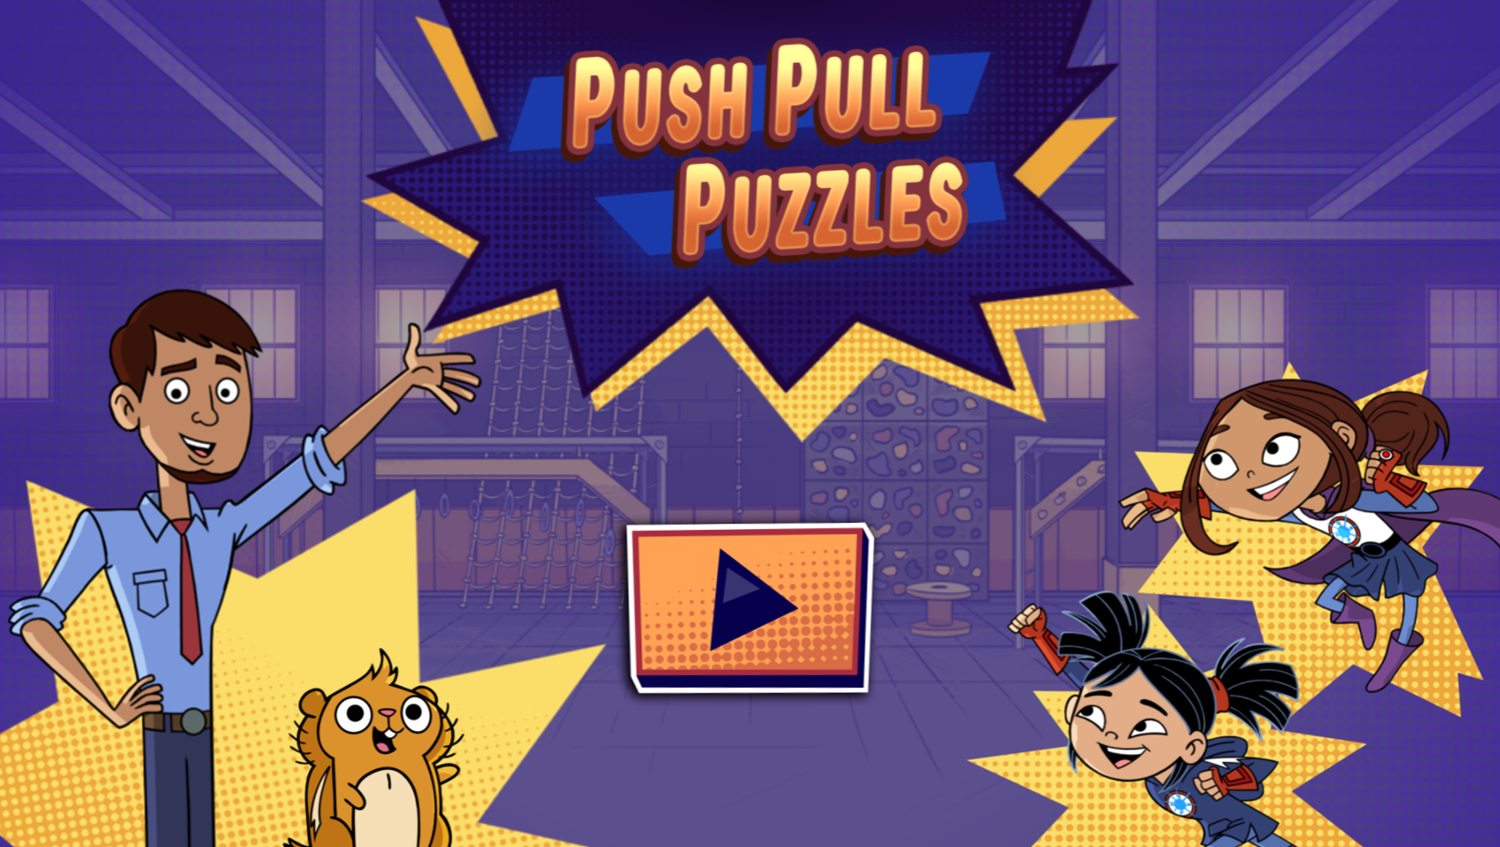 Push Pull Puzzles Game Welcome Screen Screenshot.